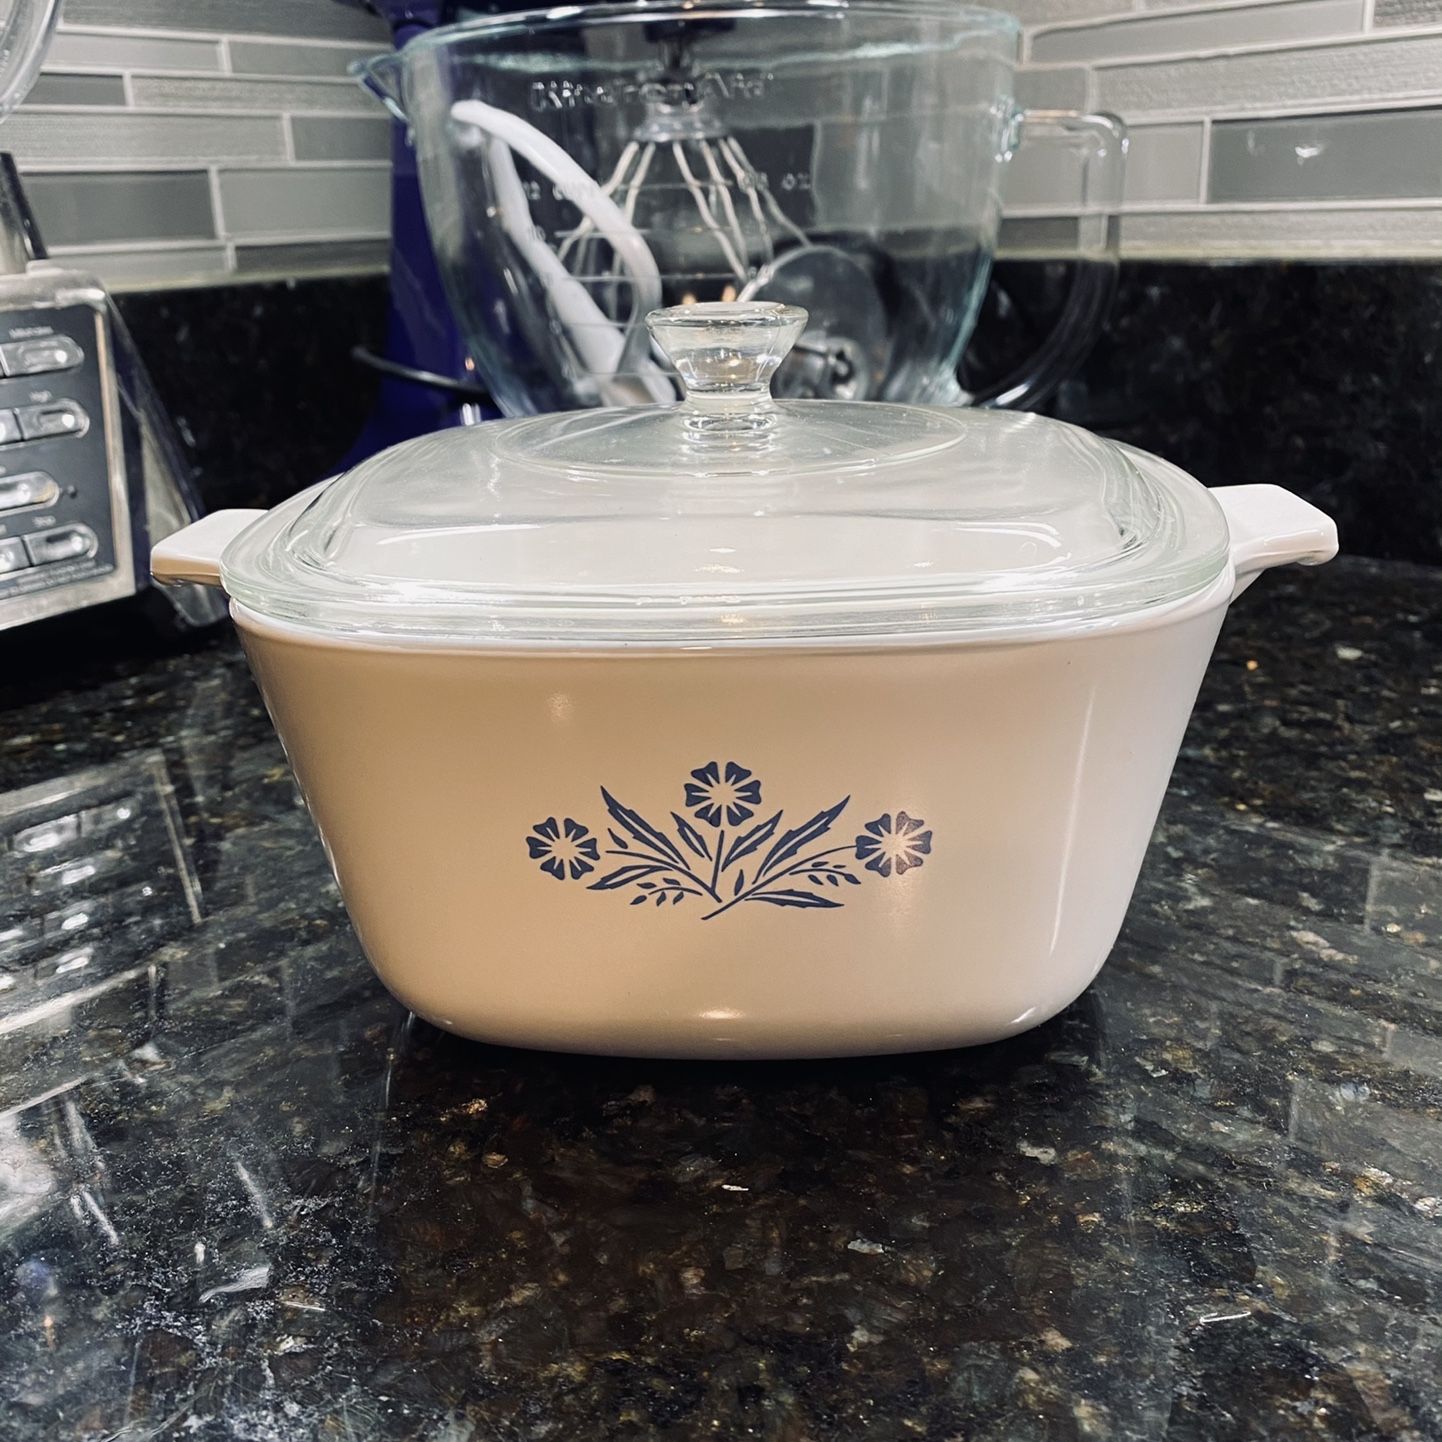 Corning ware Baking Dish With Lid